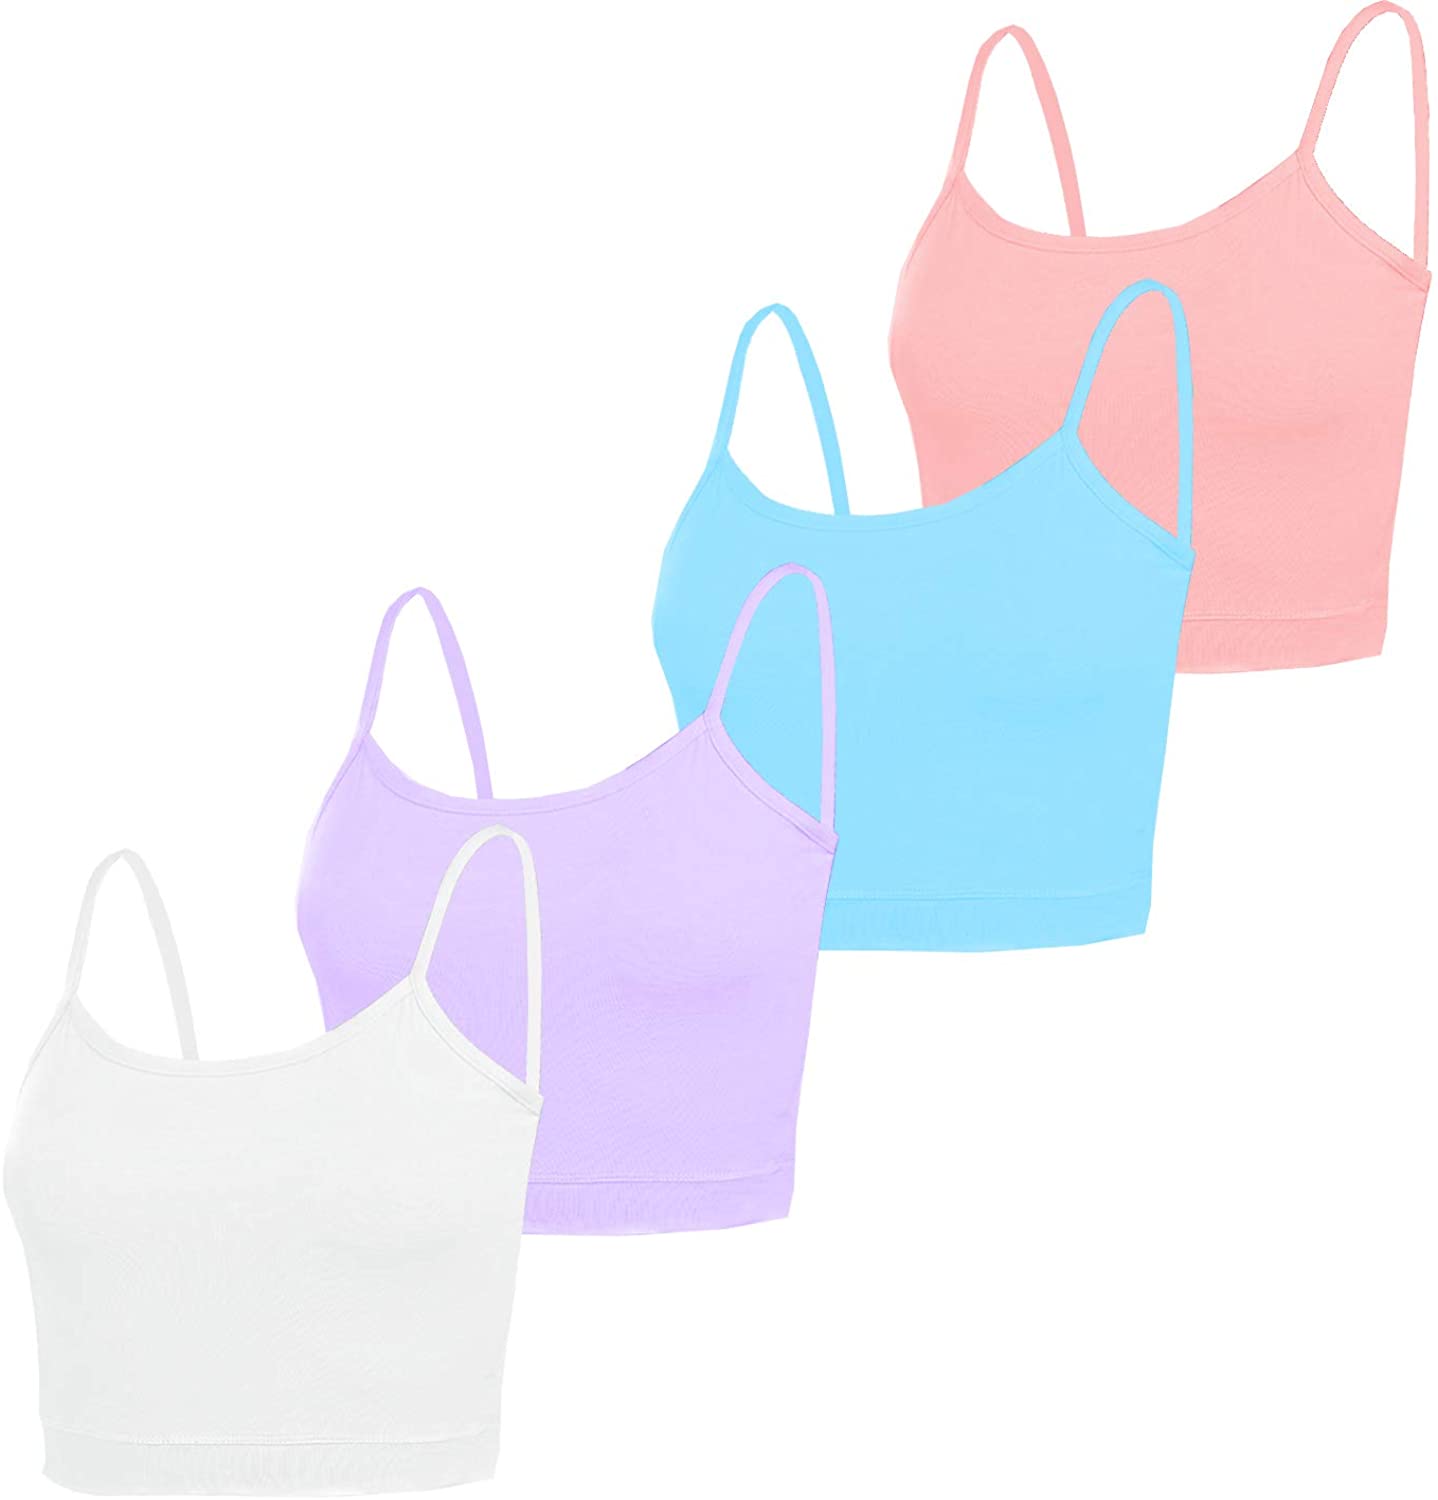 NEWITIN 4 Pack Spaghetti Strap Camisole Top Adjustable Strap Tank Crop Tops for Women Girls